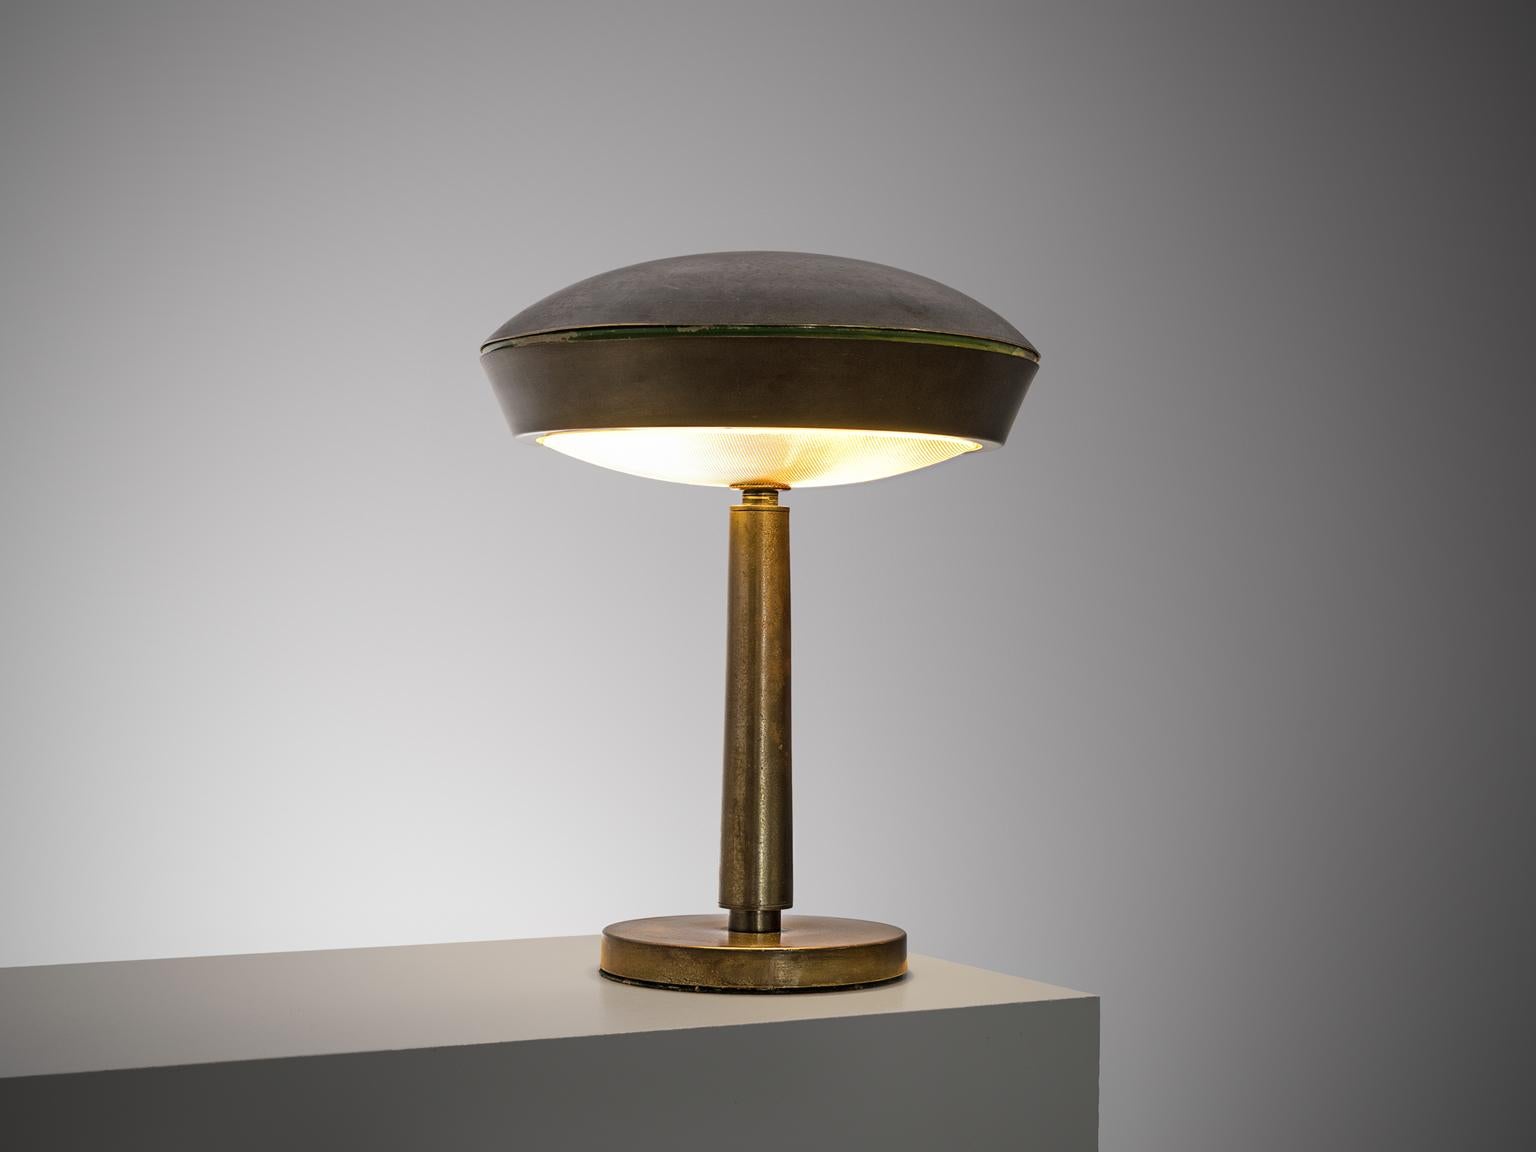 Table lamp attributed to Fontana Arte, brushed brass and glass, Italy, circa 1950 

This desk light has a hidden light source and holds the shape of a mushroom. The stem has a tubular form. With it's circular lines this voluptuous lamp, holds a